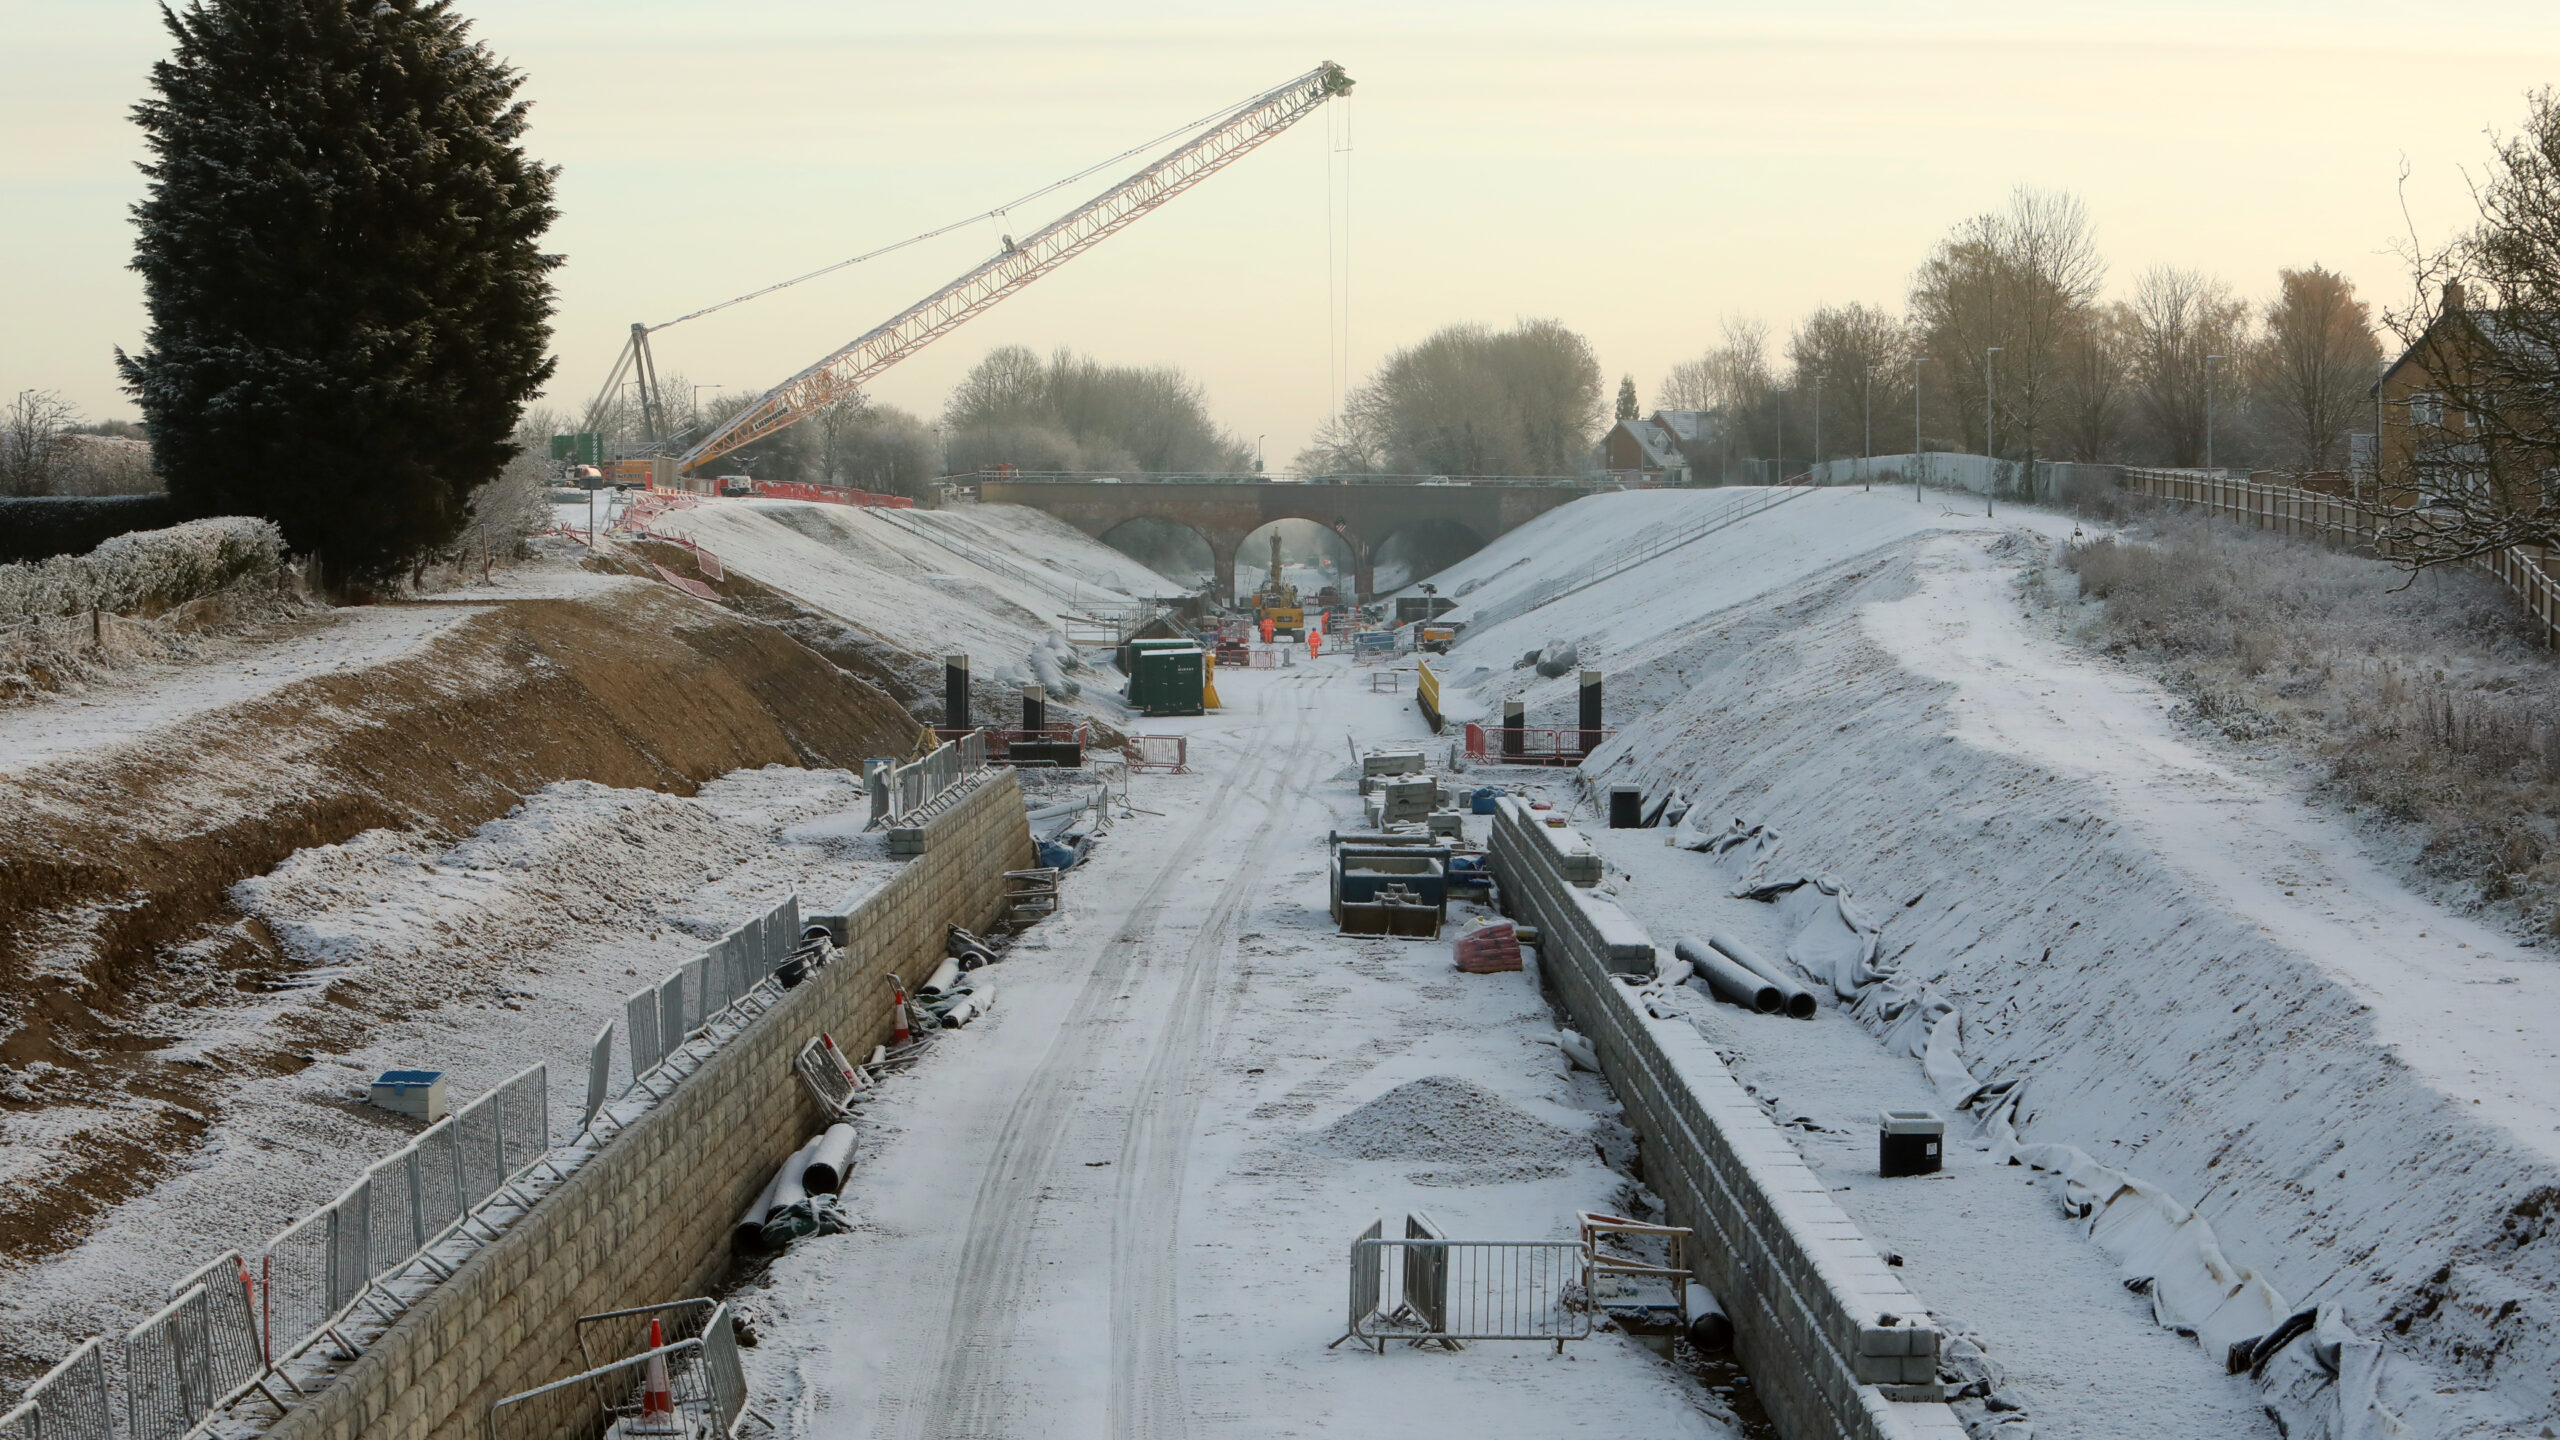 Platform foundations being laid in the snow at Winslow station as part of the East West Rail project